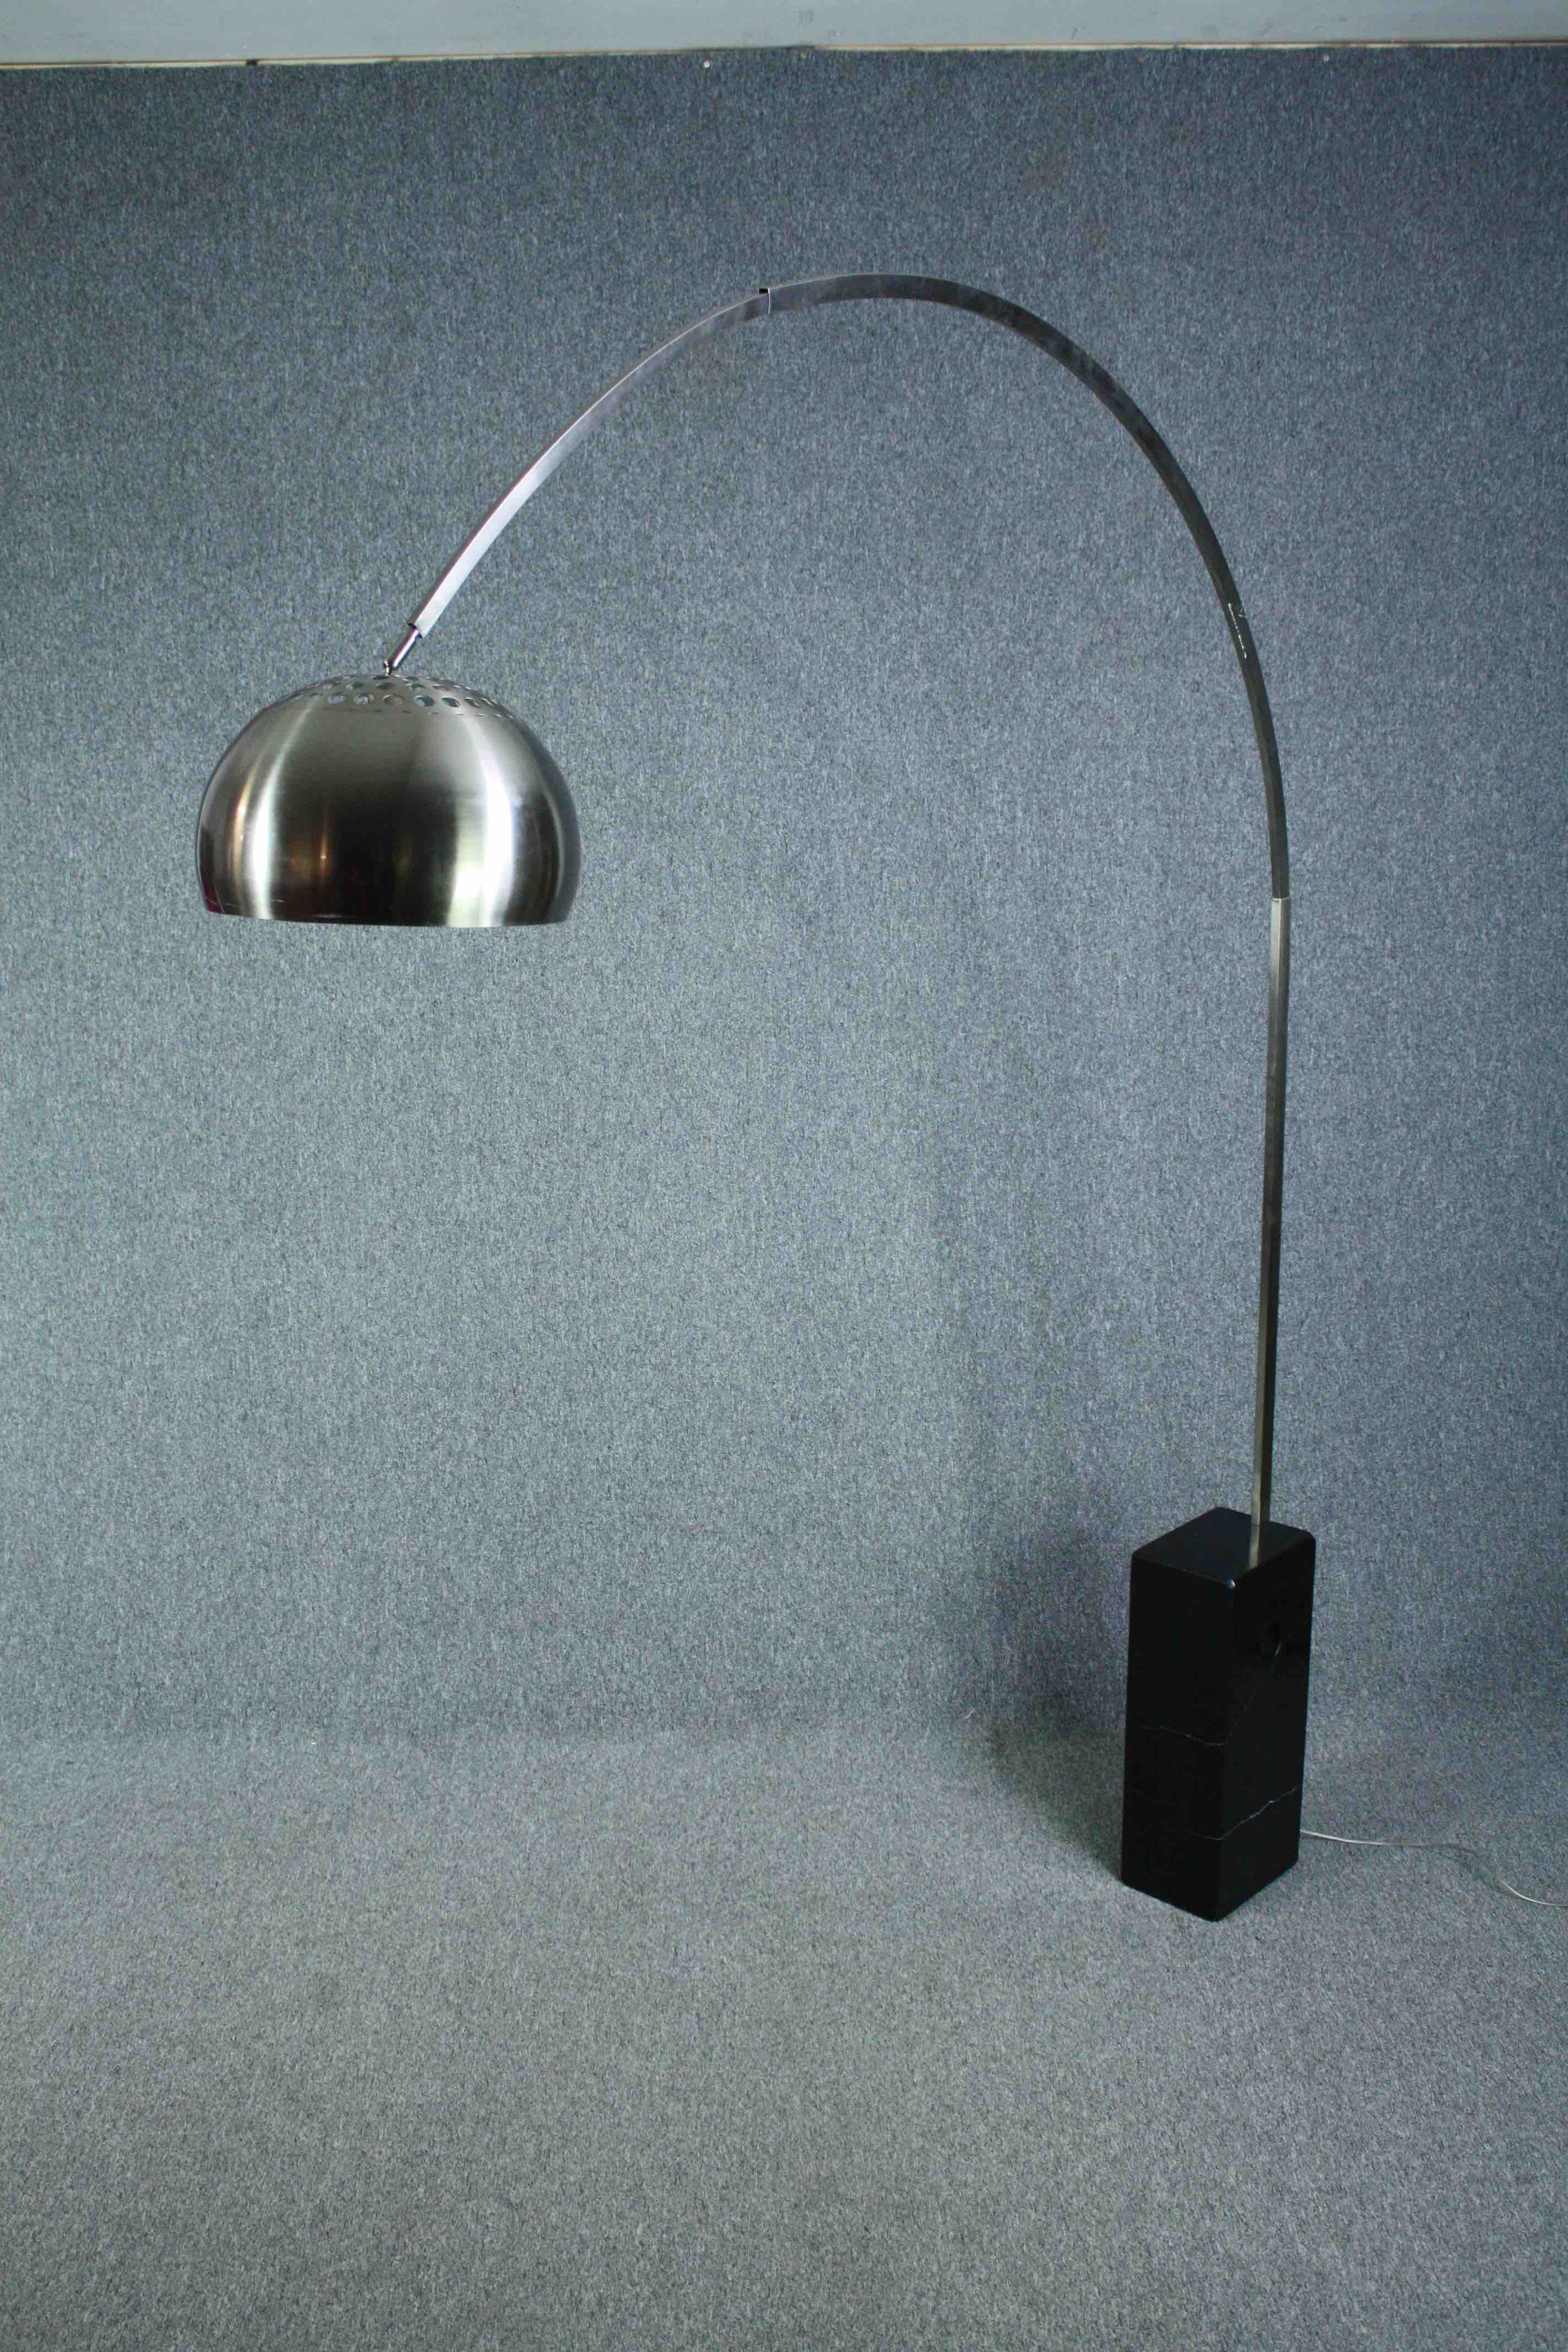 Conran. Arc lamp, Achille Castiglioni for Flos "Arco" lamp, chrome on white veined black marble - Image 2 of 7